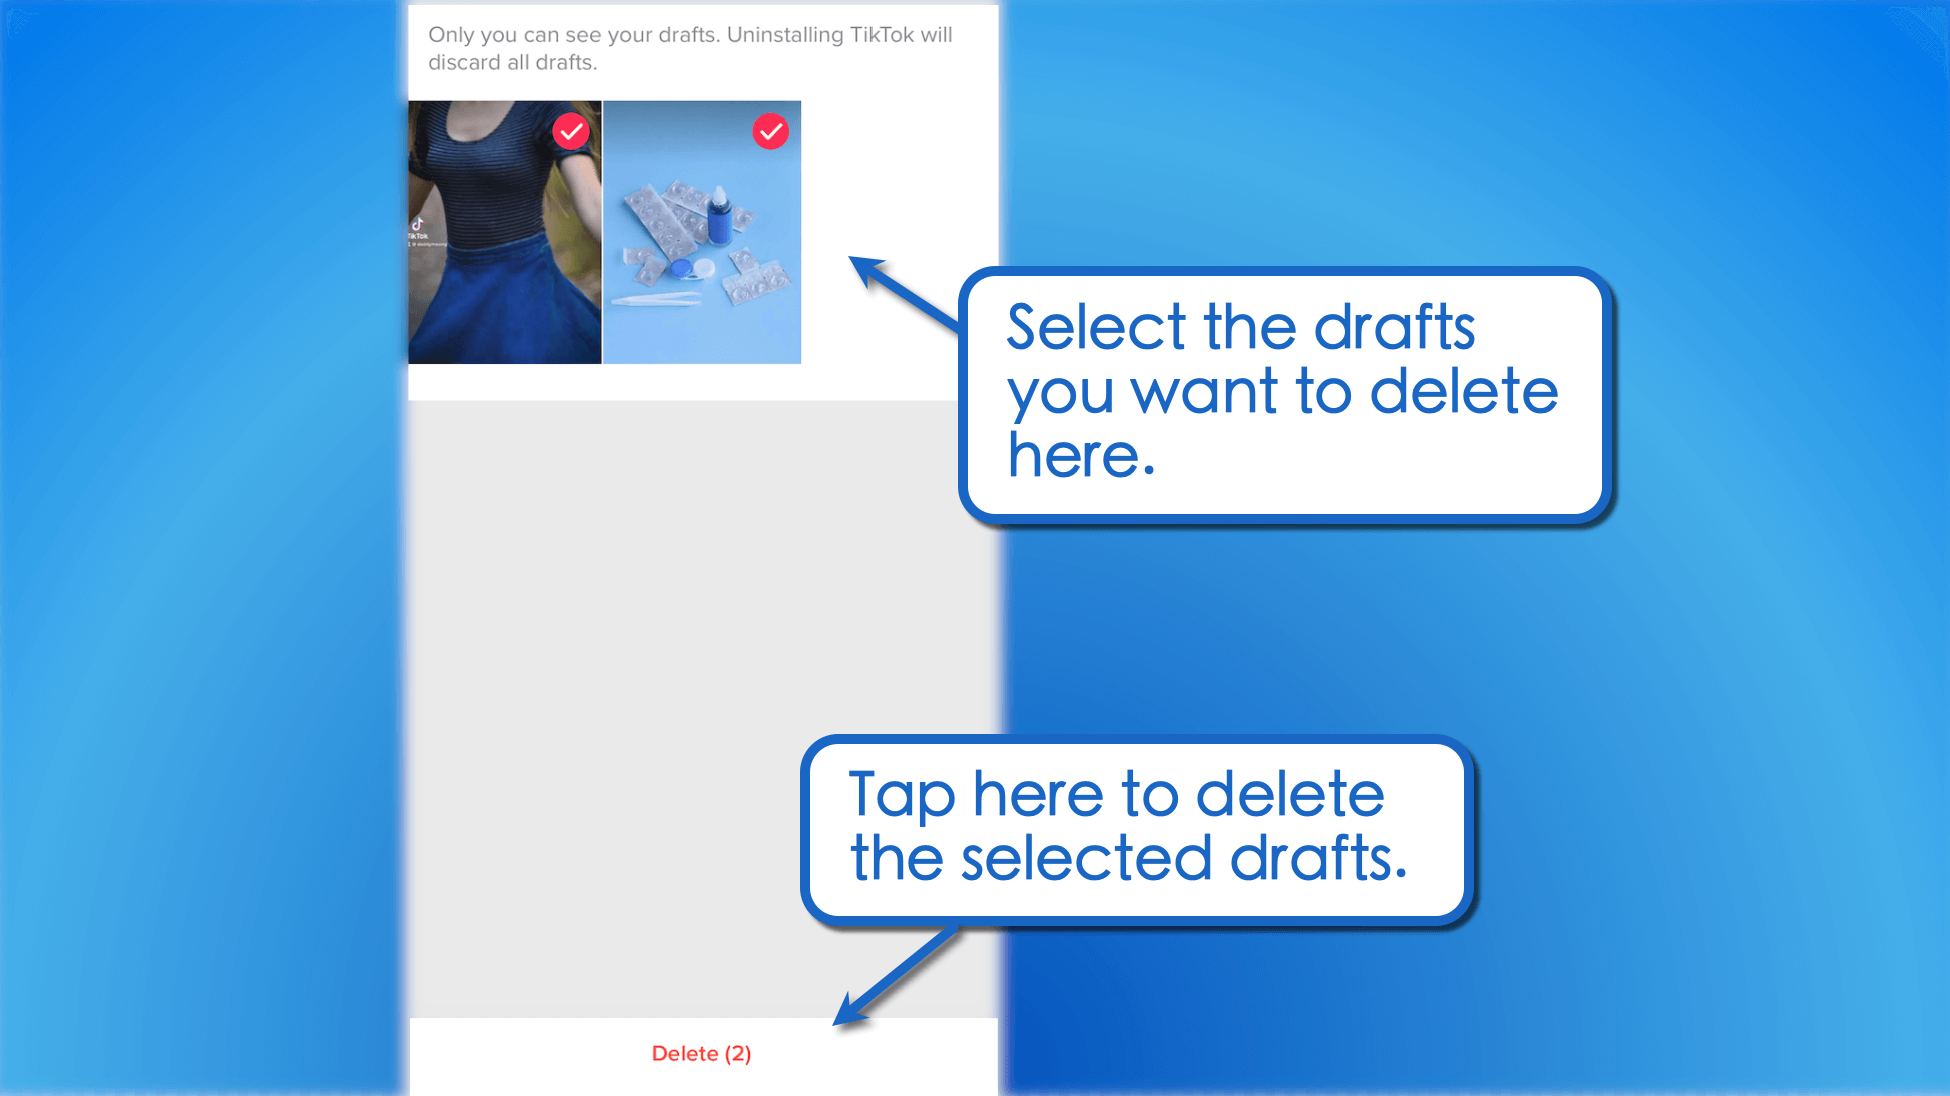 Tick the checkboxes of the drafts you wish to delete.